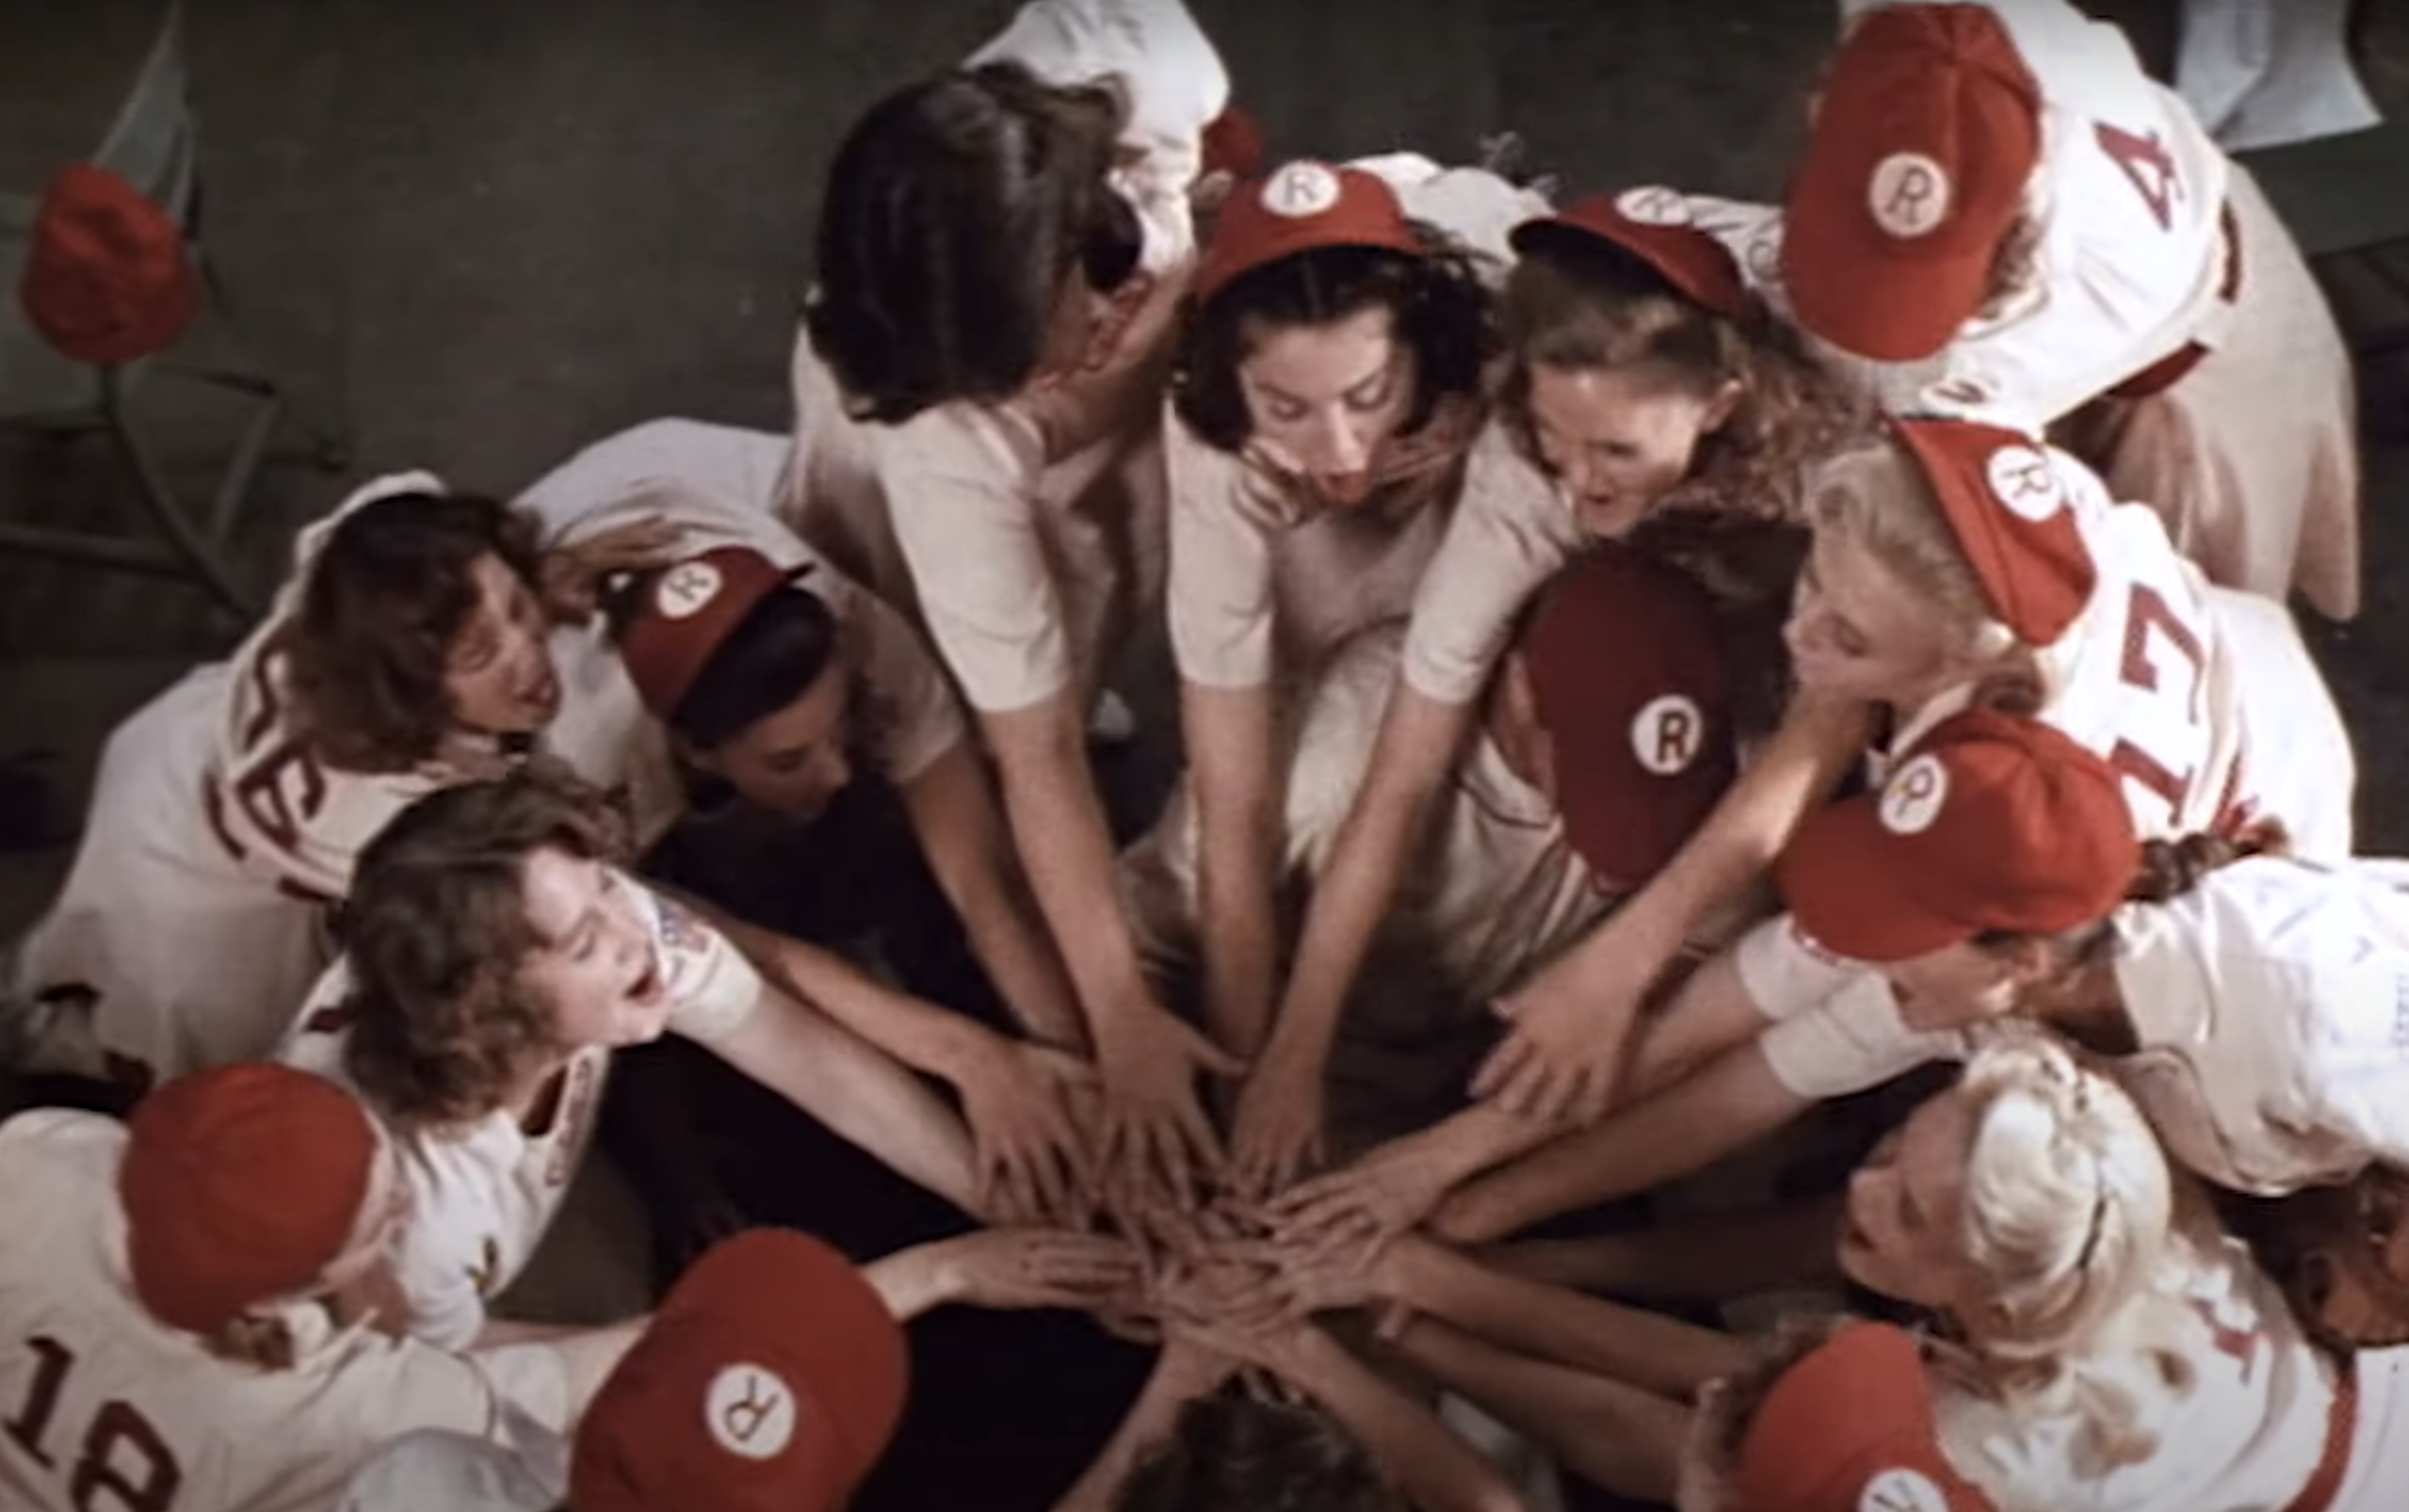 The baseball team, including Madonna, touching hands